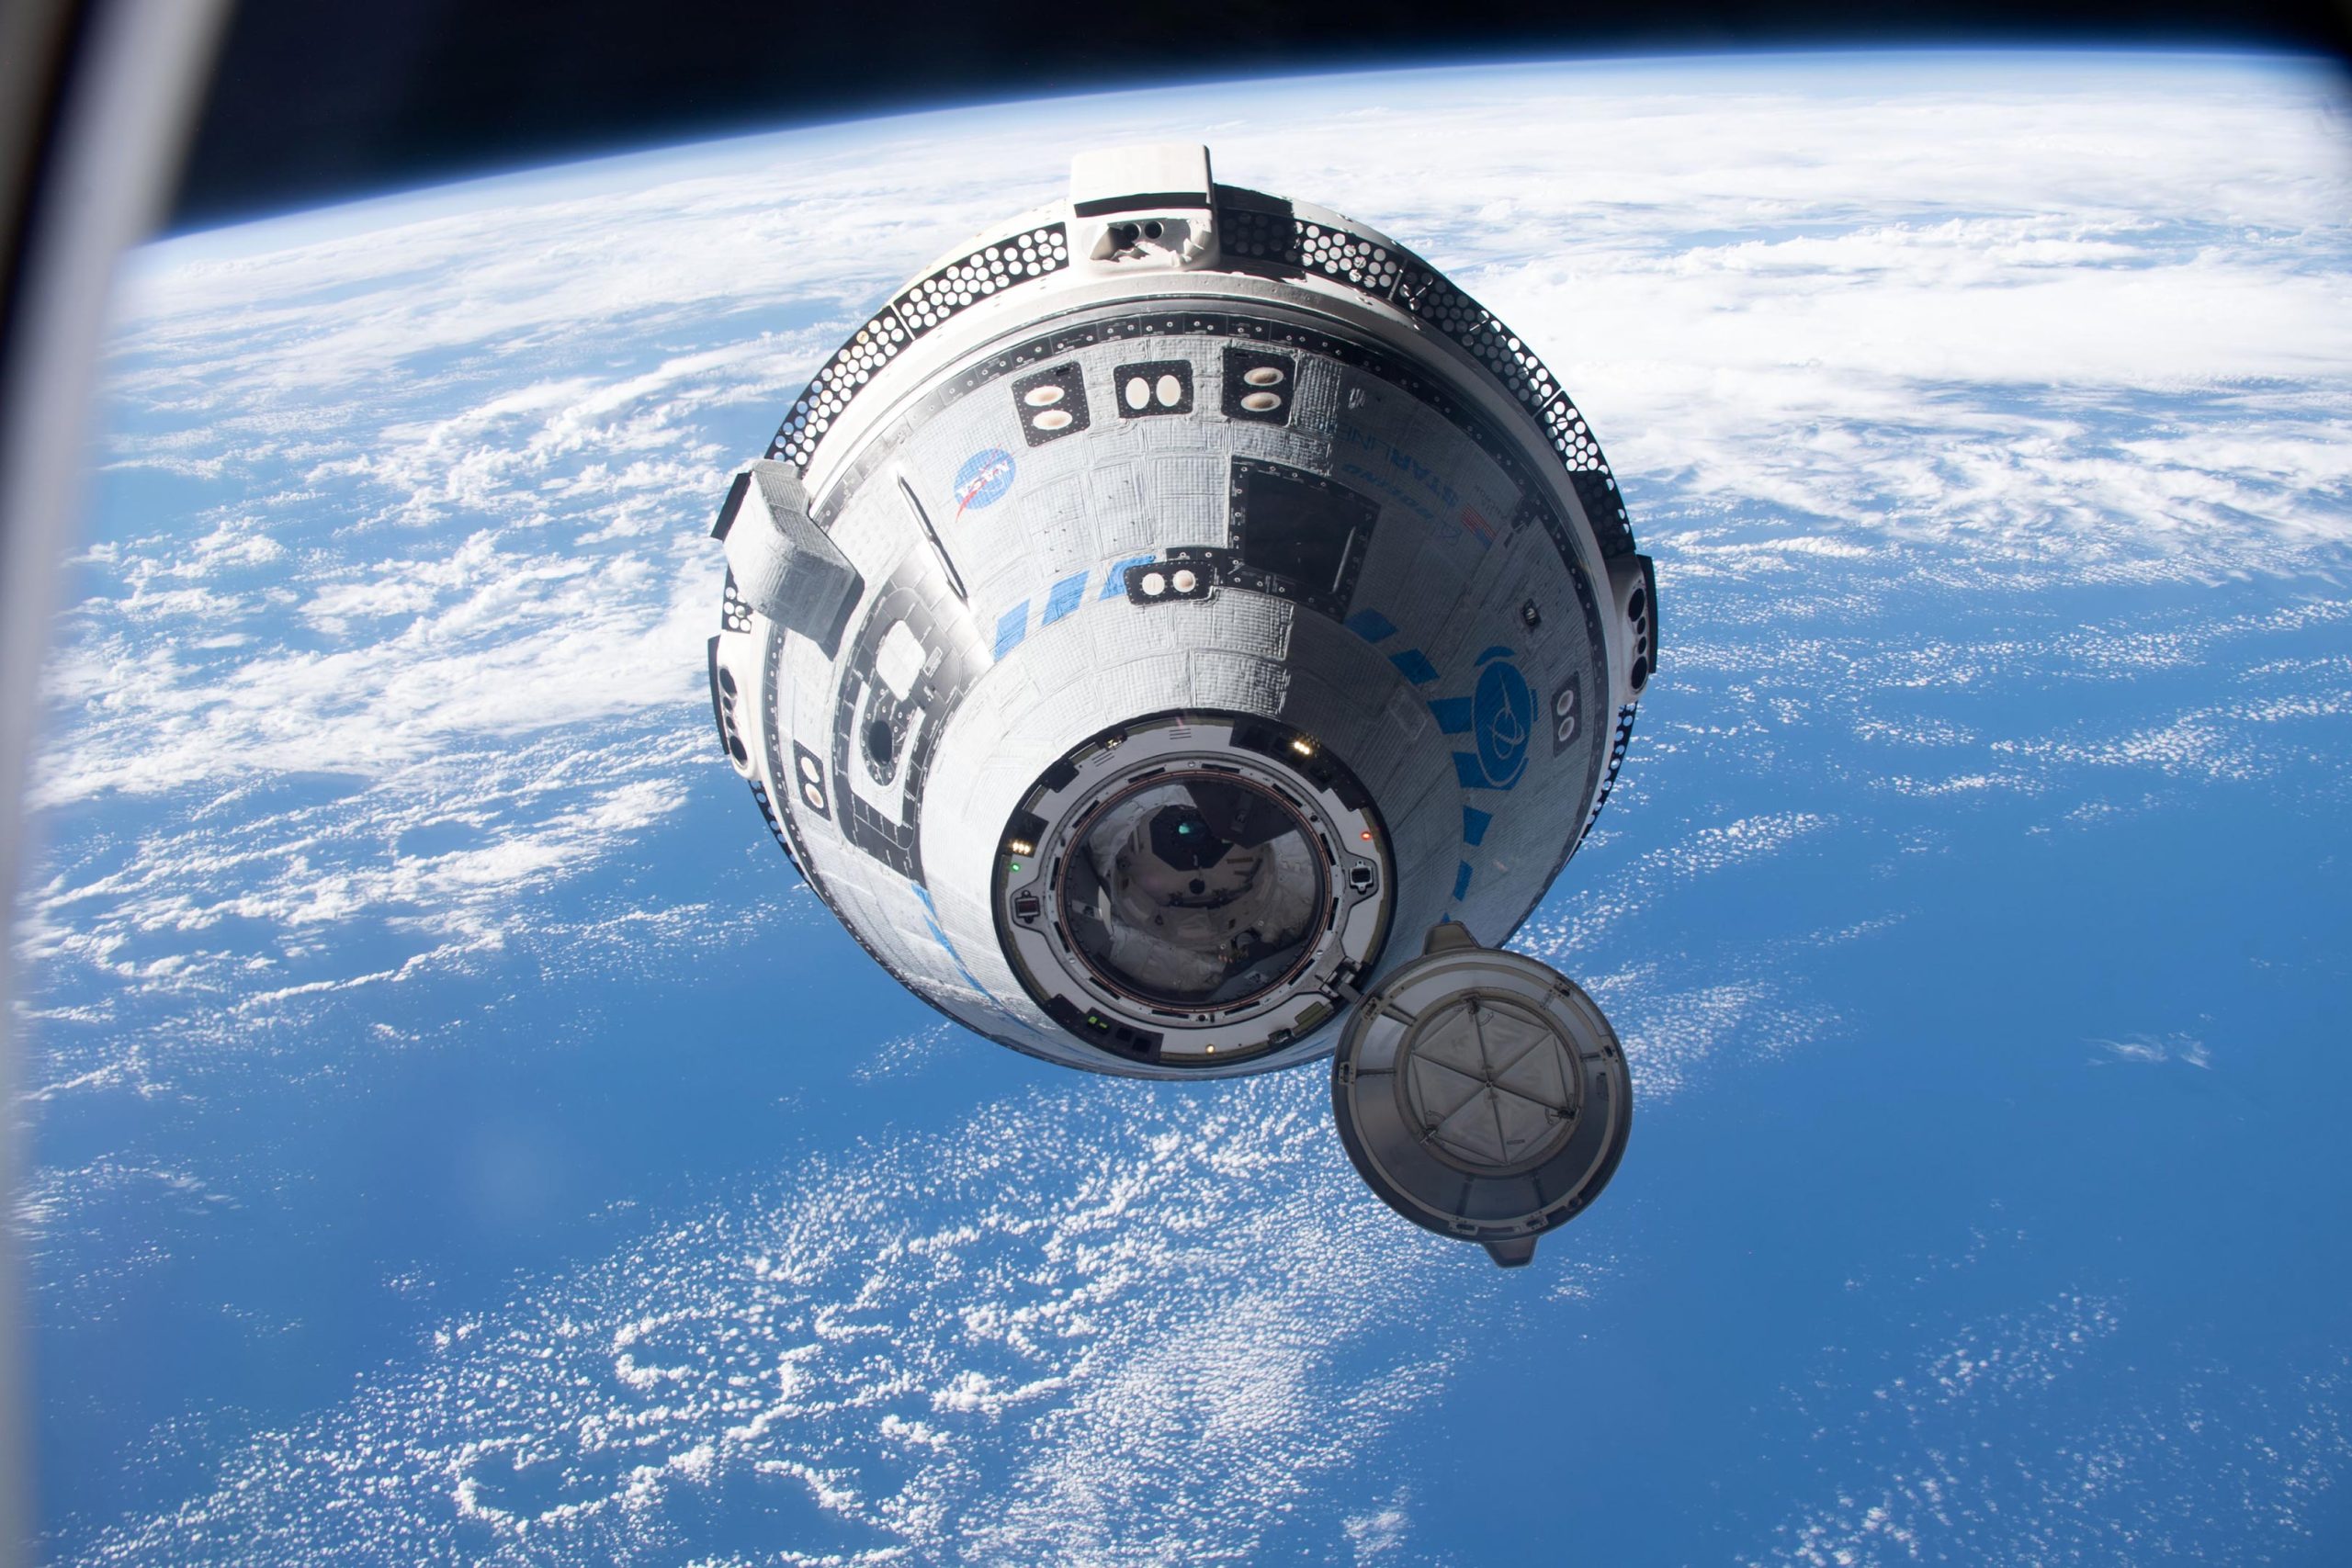 Boeings-CST-100-Starliner-Crew-Ship-Approaches-the-International-Space-Station-scaled.jpg